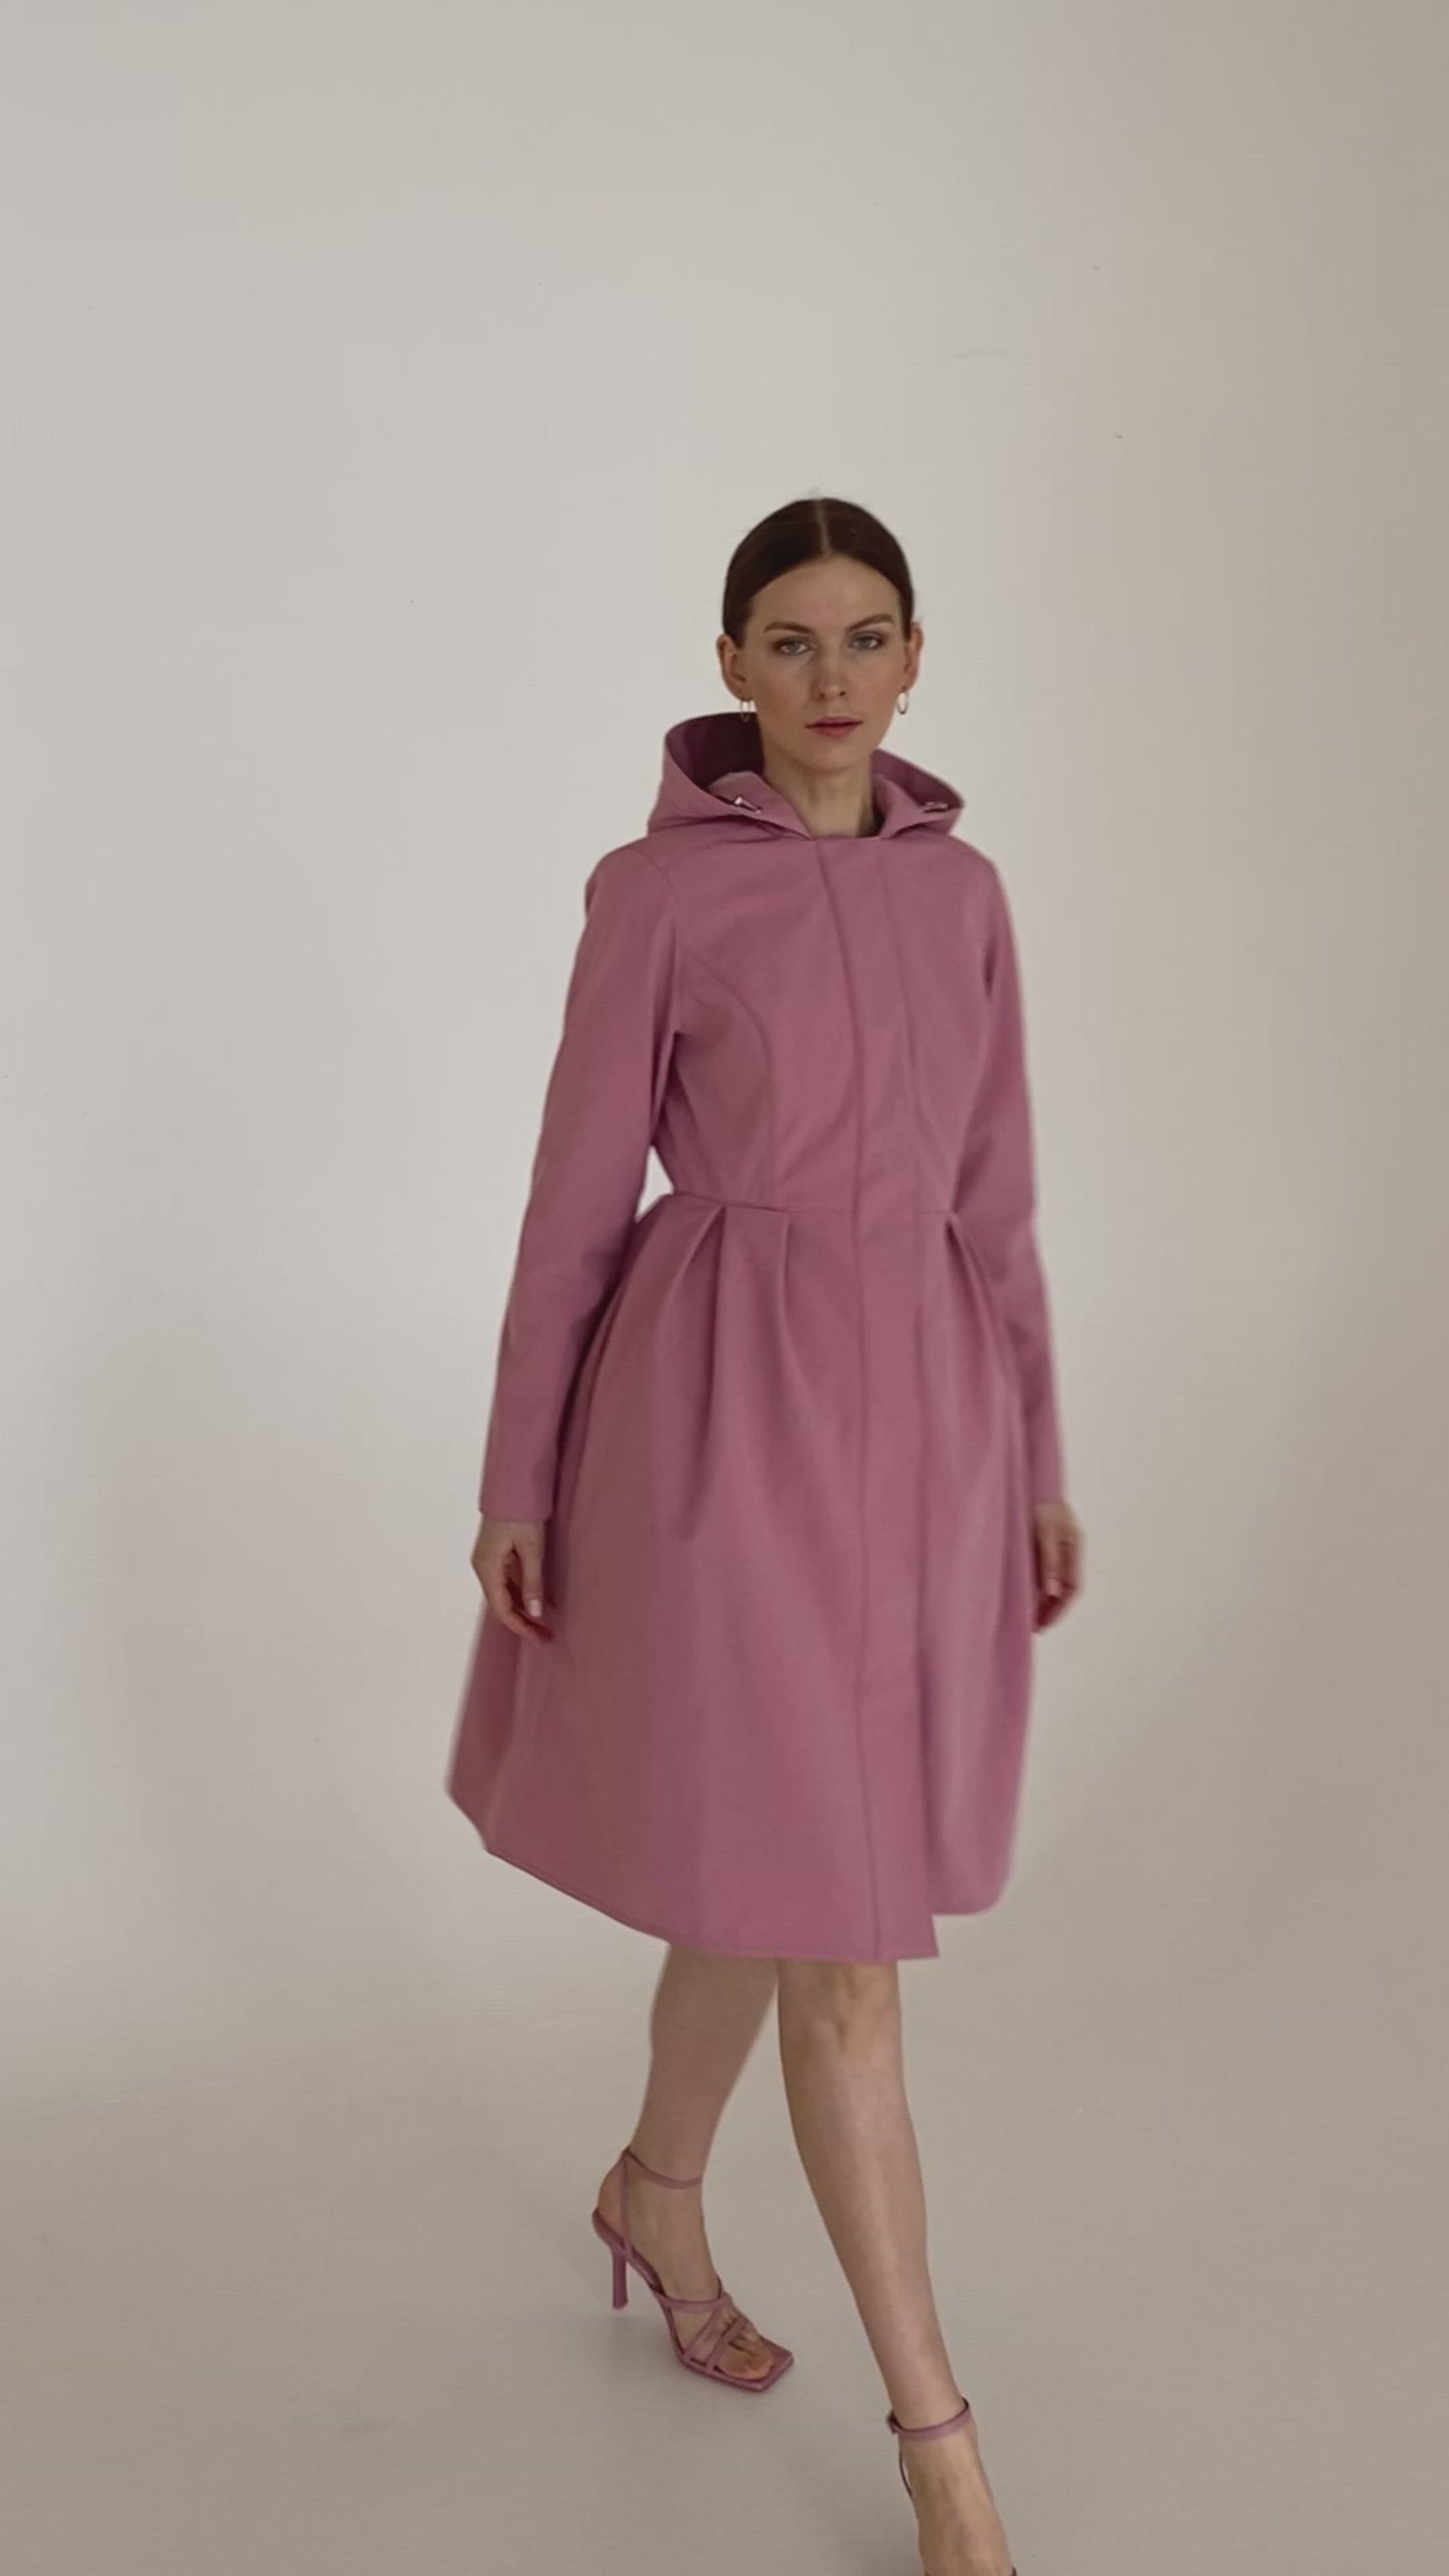 Dusky Pink Raincoat for Women with fitted top part and pleated skirt part